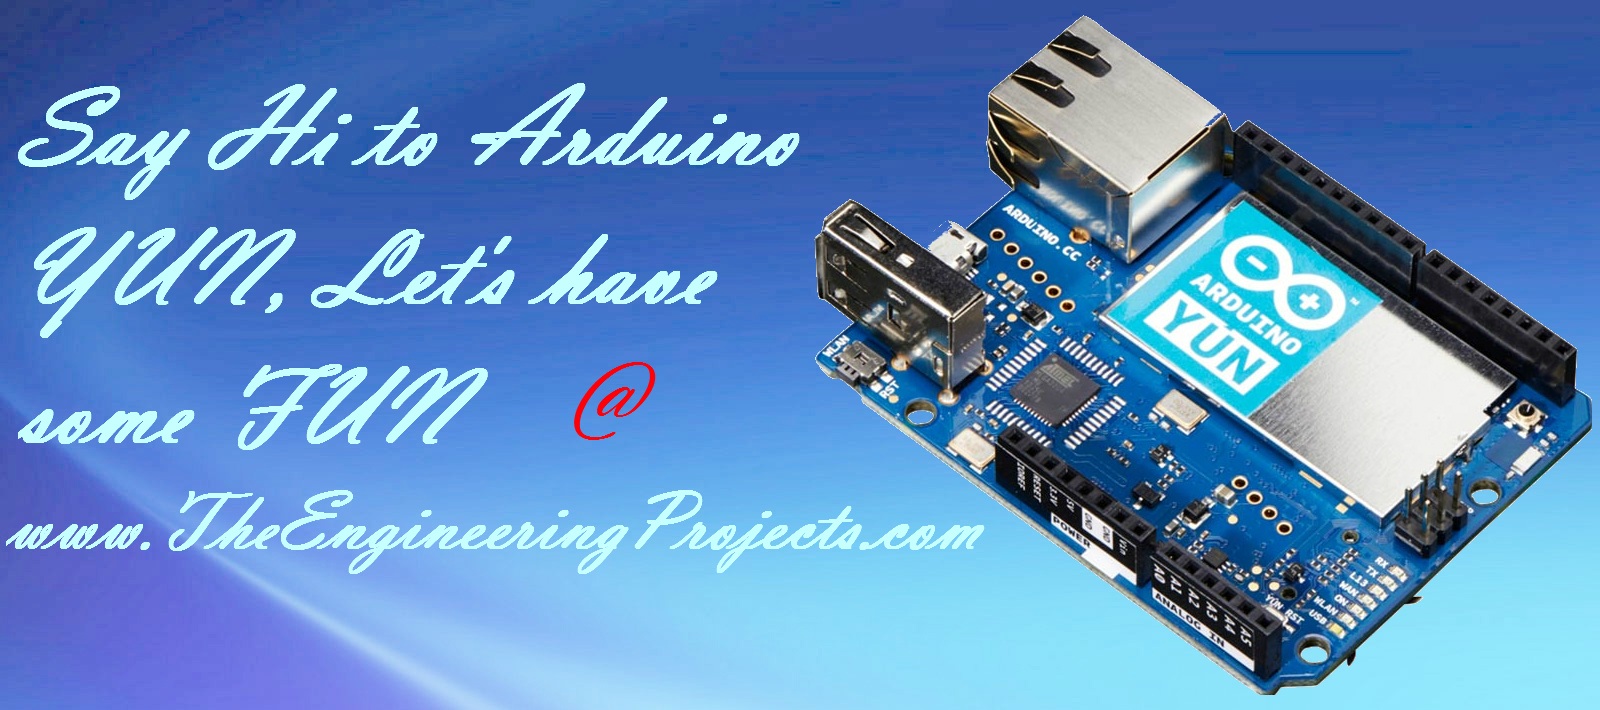 Getting started with arduino yun,manually connect arduino yun with wifi,connect yun with wifi